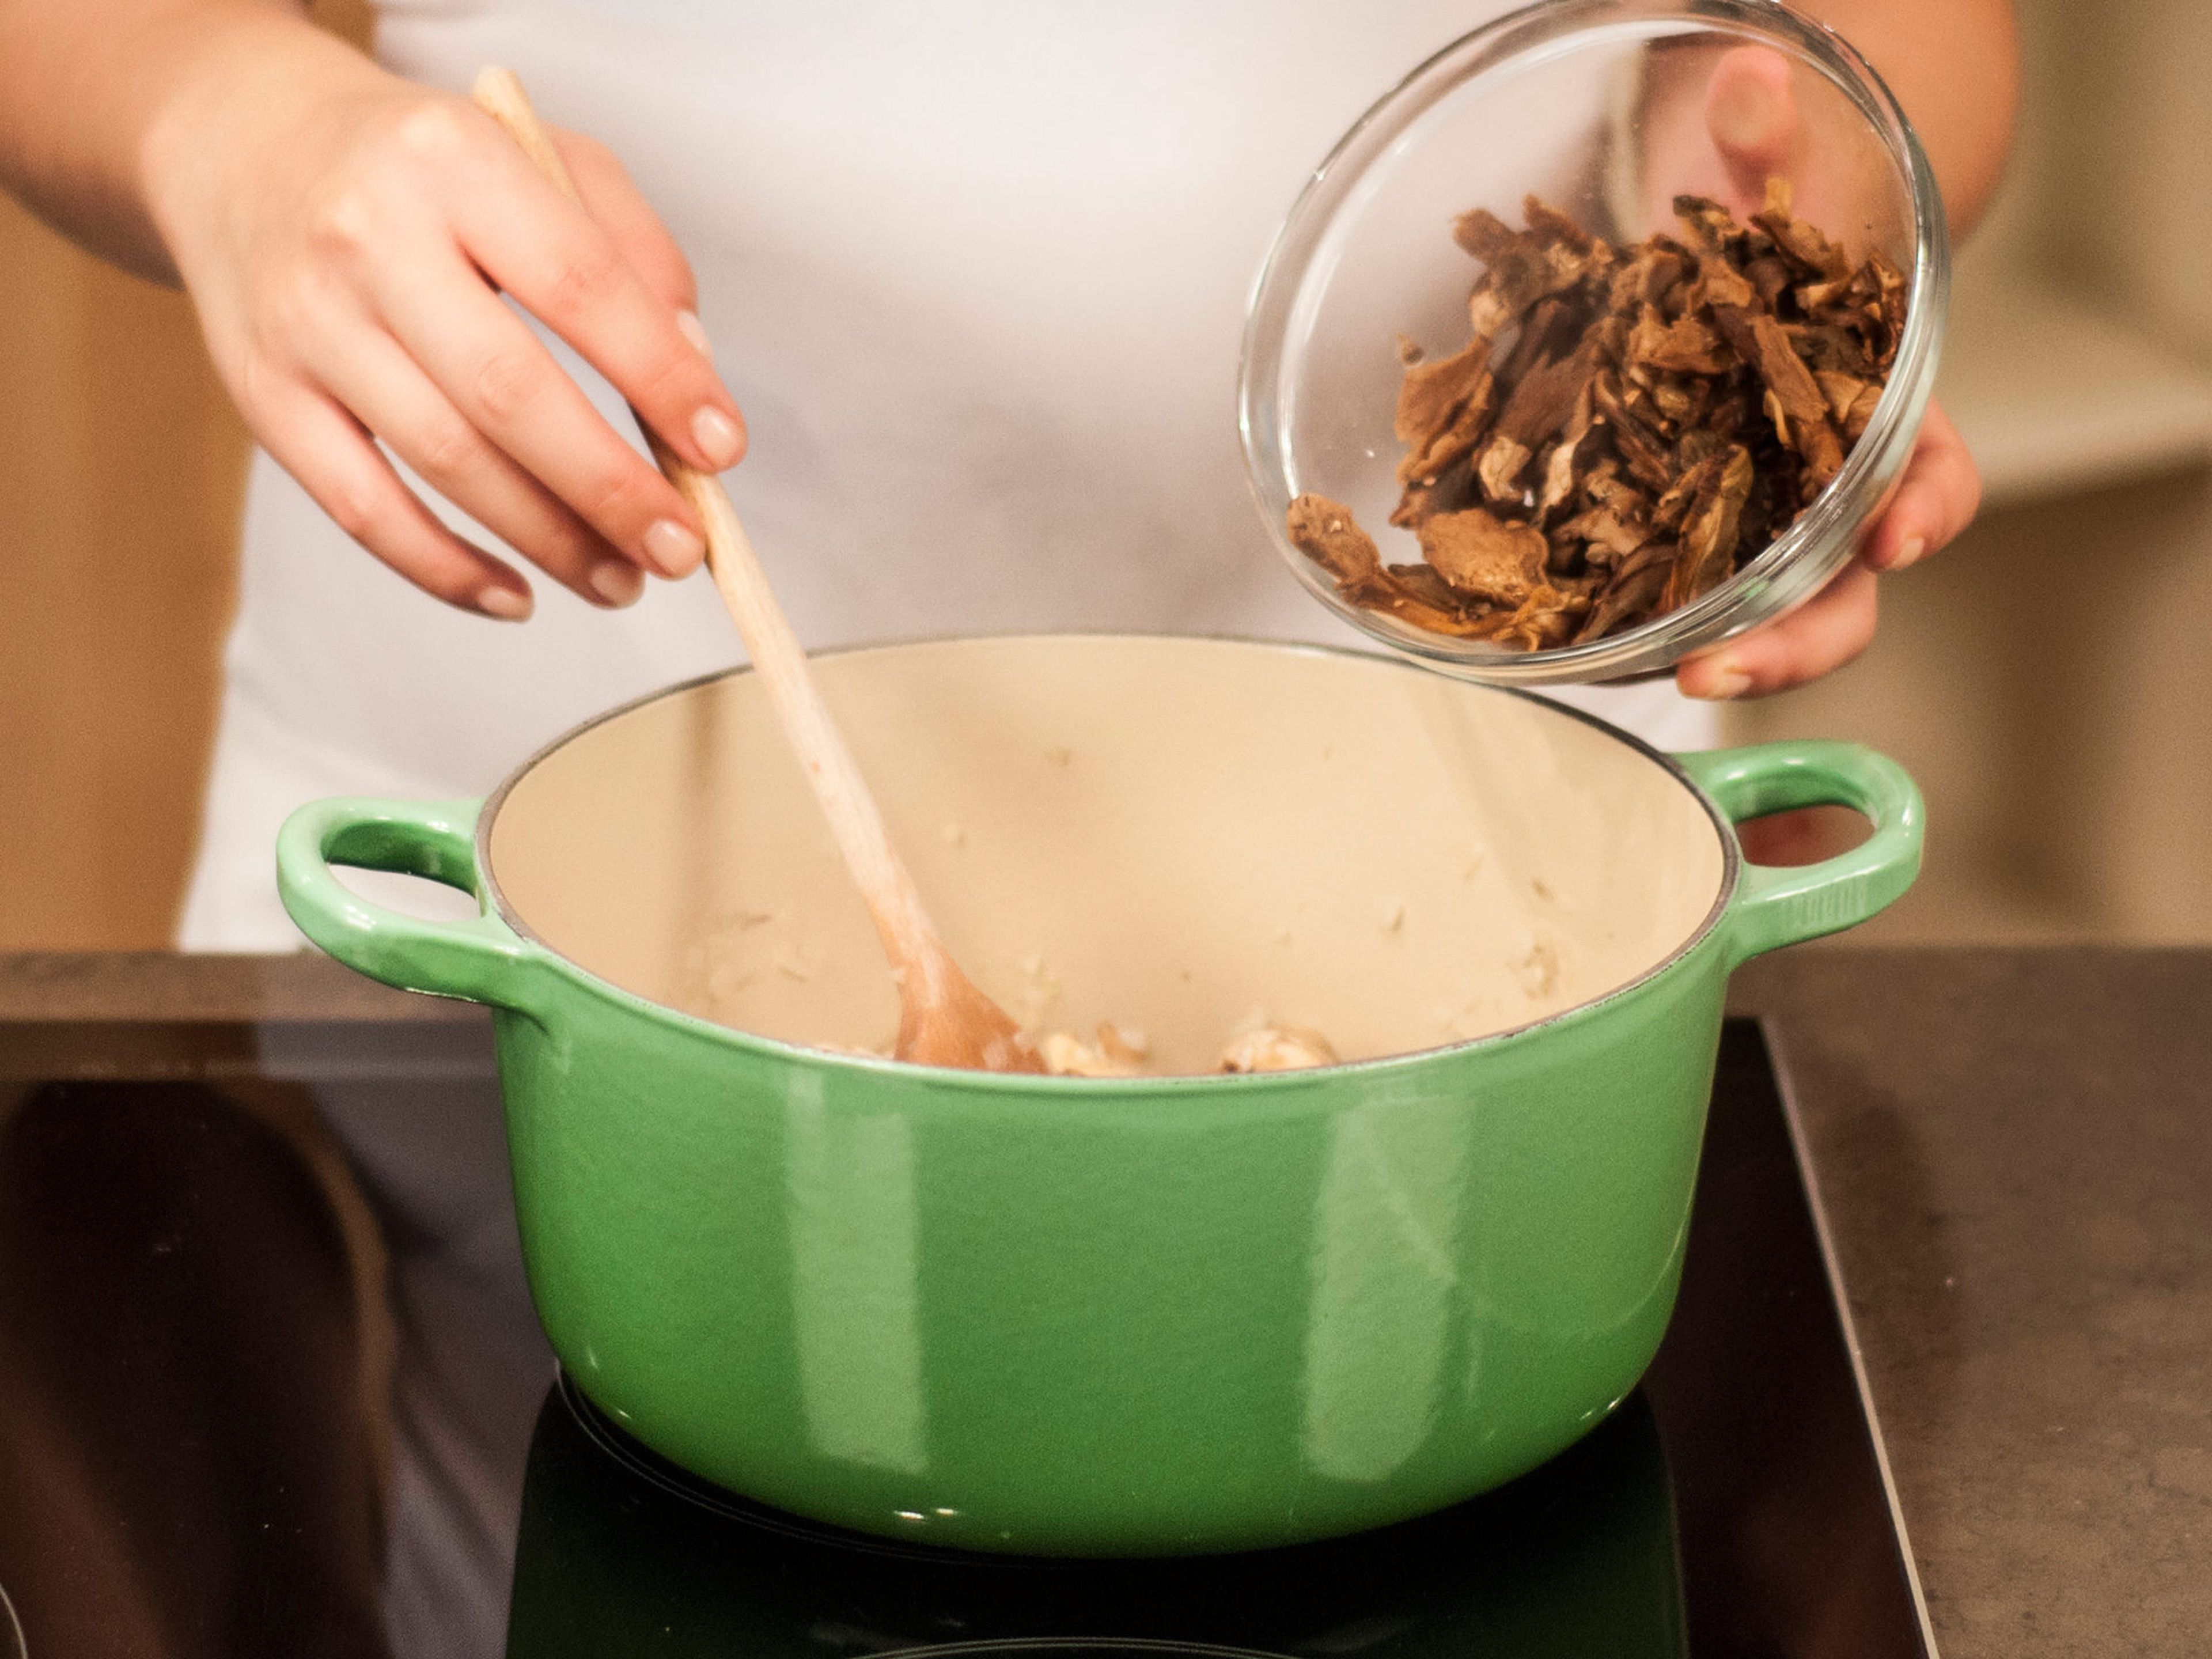 Drain soaked mushrooms, make sure to keep the soaking liquid. In a saucepan, add two-thirds of the butter and sautée shallots and garlic until translucent. Add button mushrooms and dried mushrooms and continue sauteing for approx. 4 – 6min.